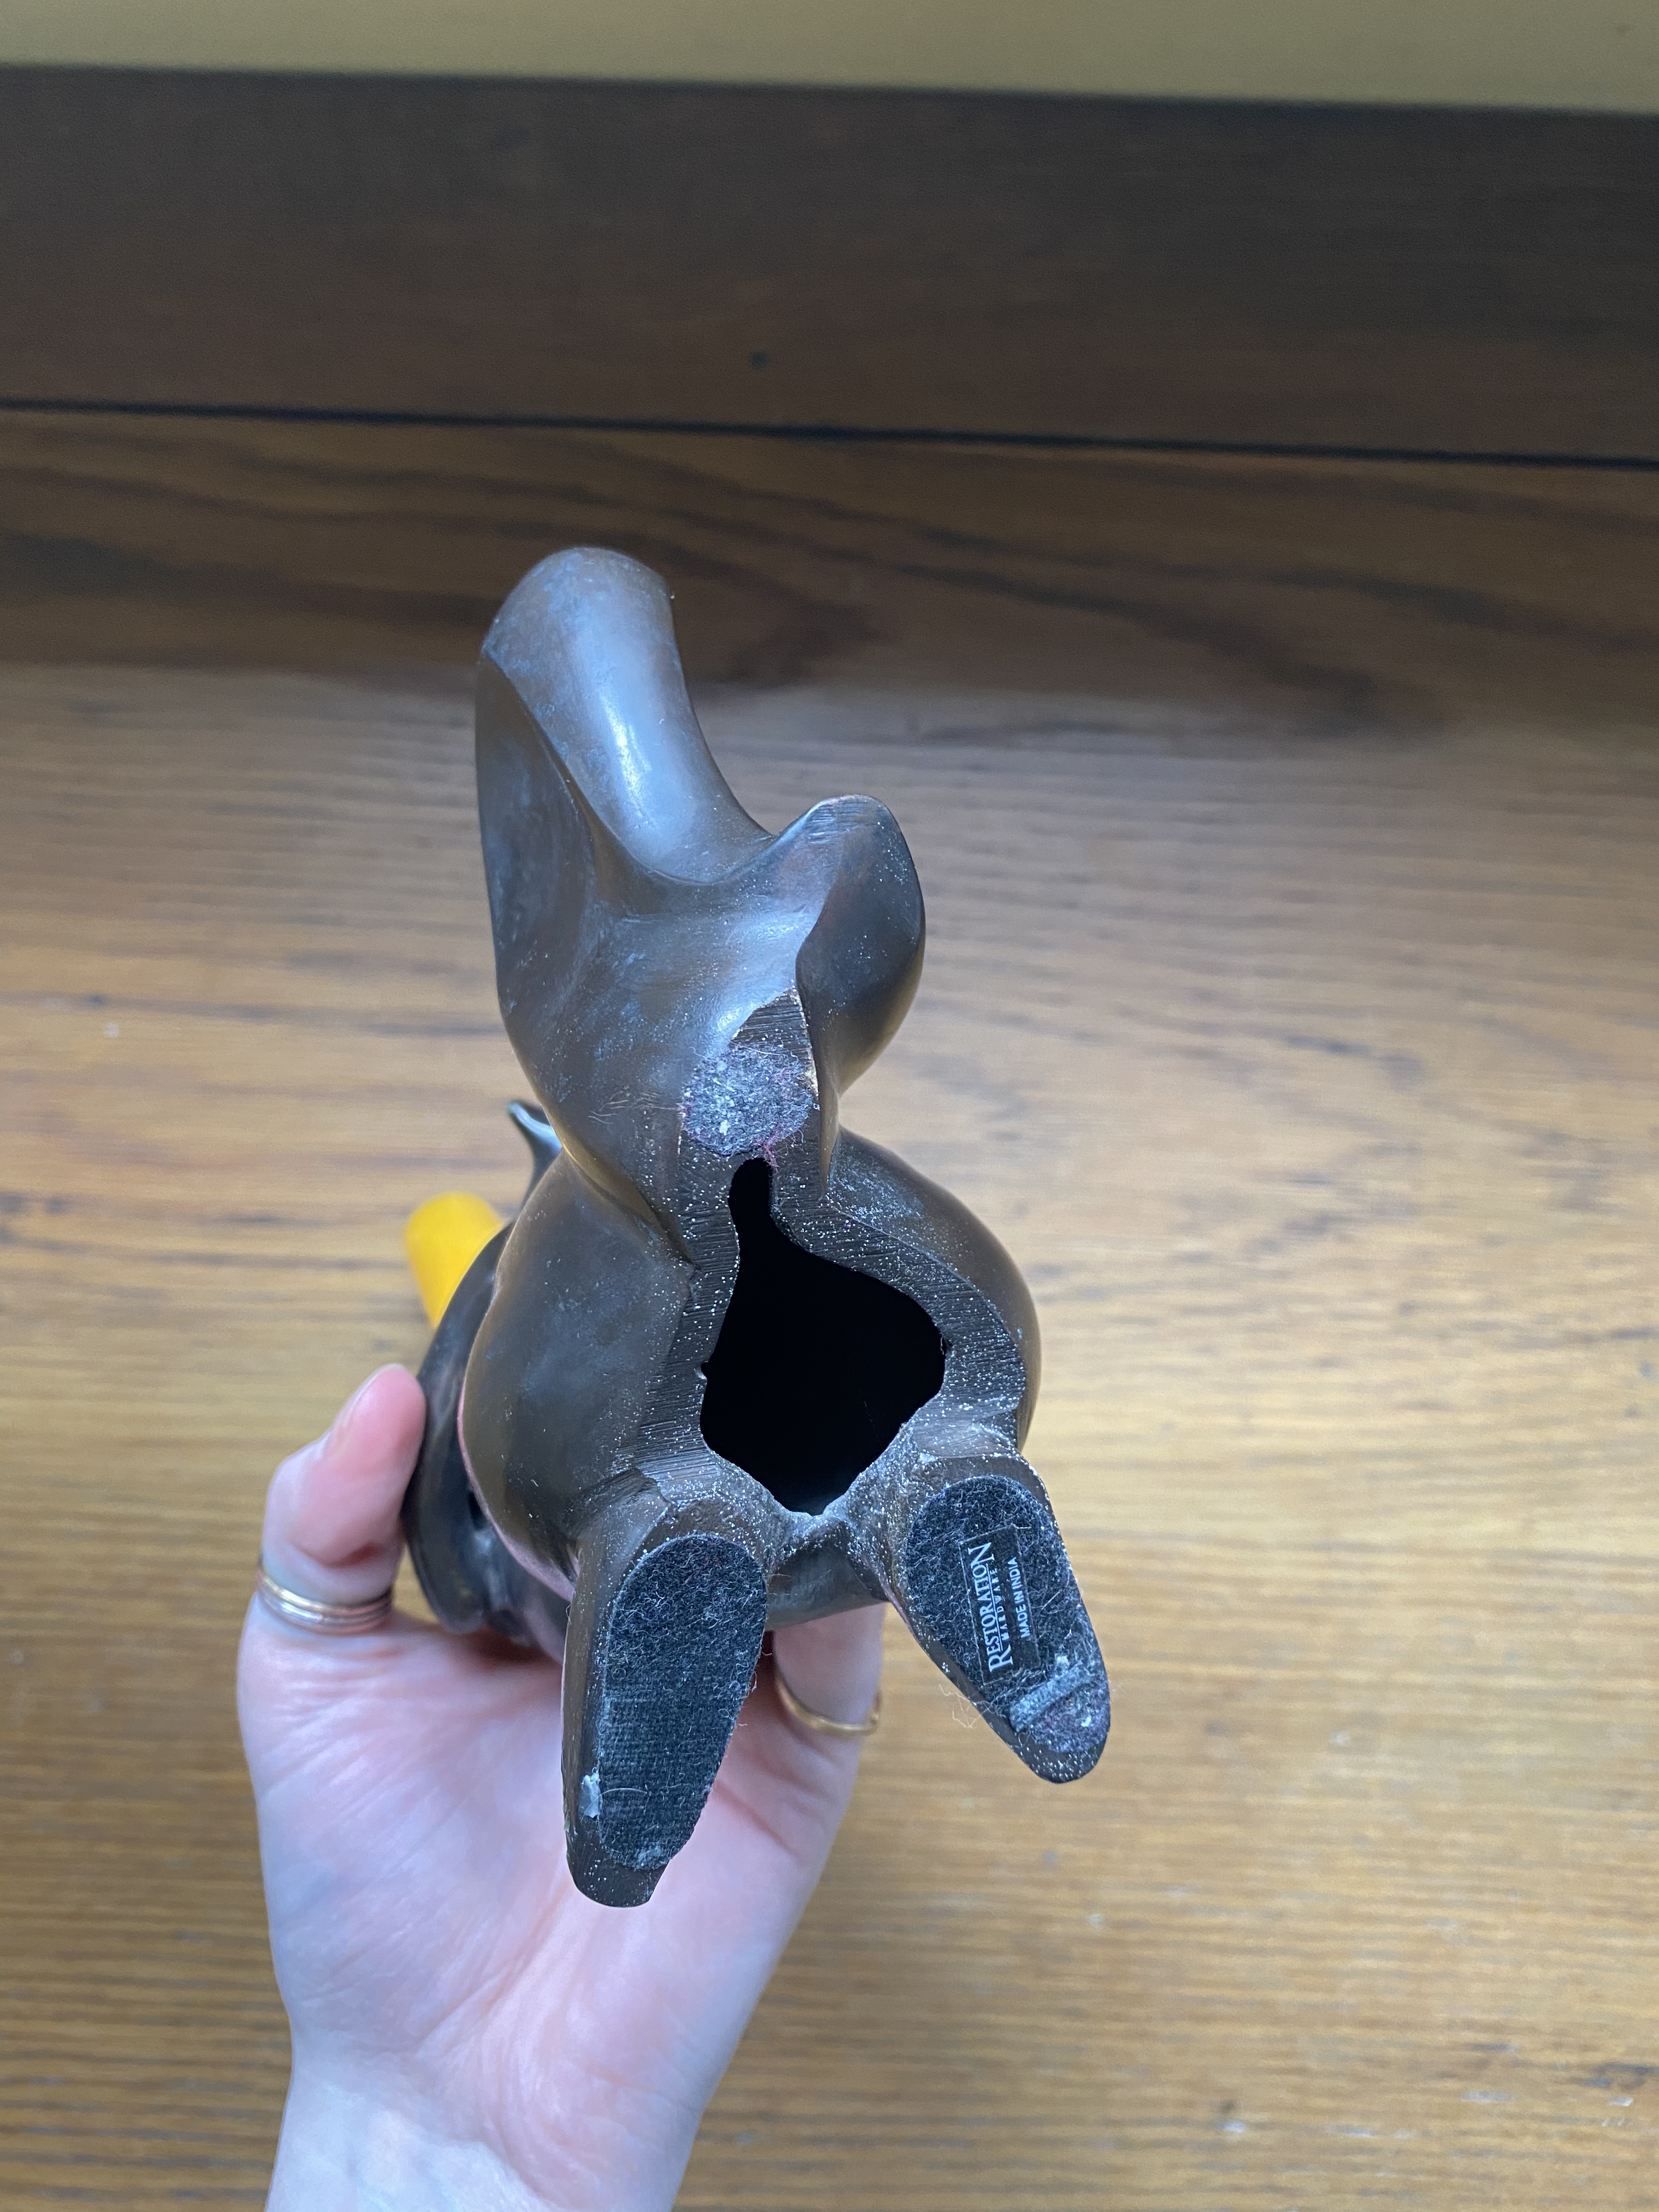 the bottom of the squirrel, the feet and body are flat for a steady base and hollowed out. the squirrel is from restoration hardware, evident from the sticker still on the bottom of the foot